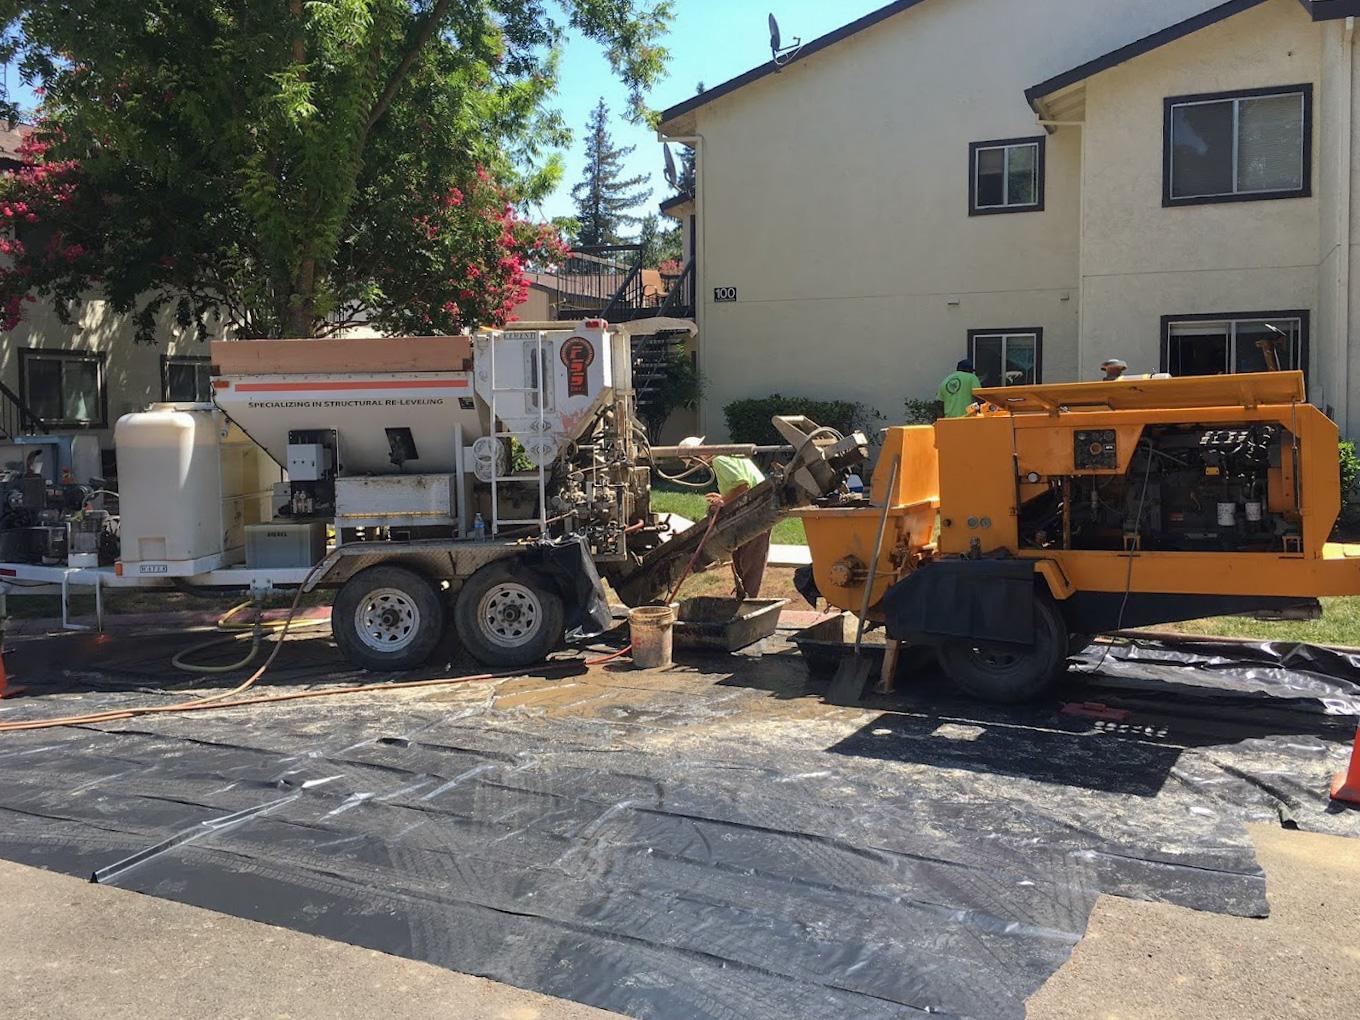 Picture of Foundation Soil Stabilization Inc. - Foundation Soil Stabilization Inc.